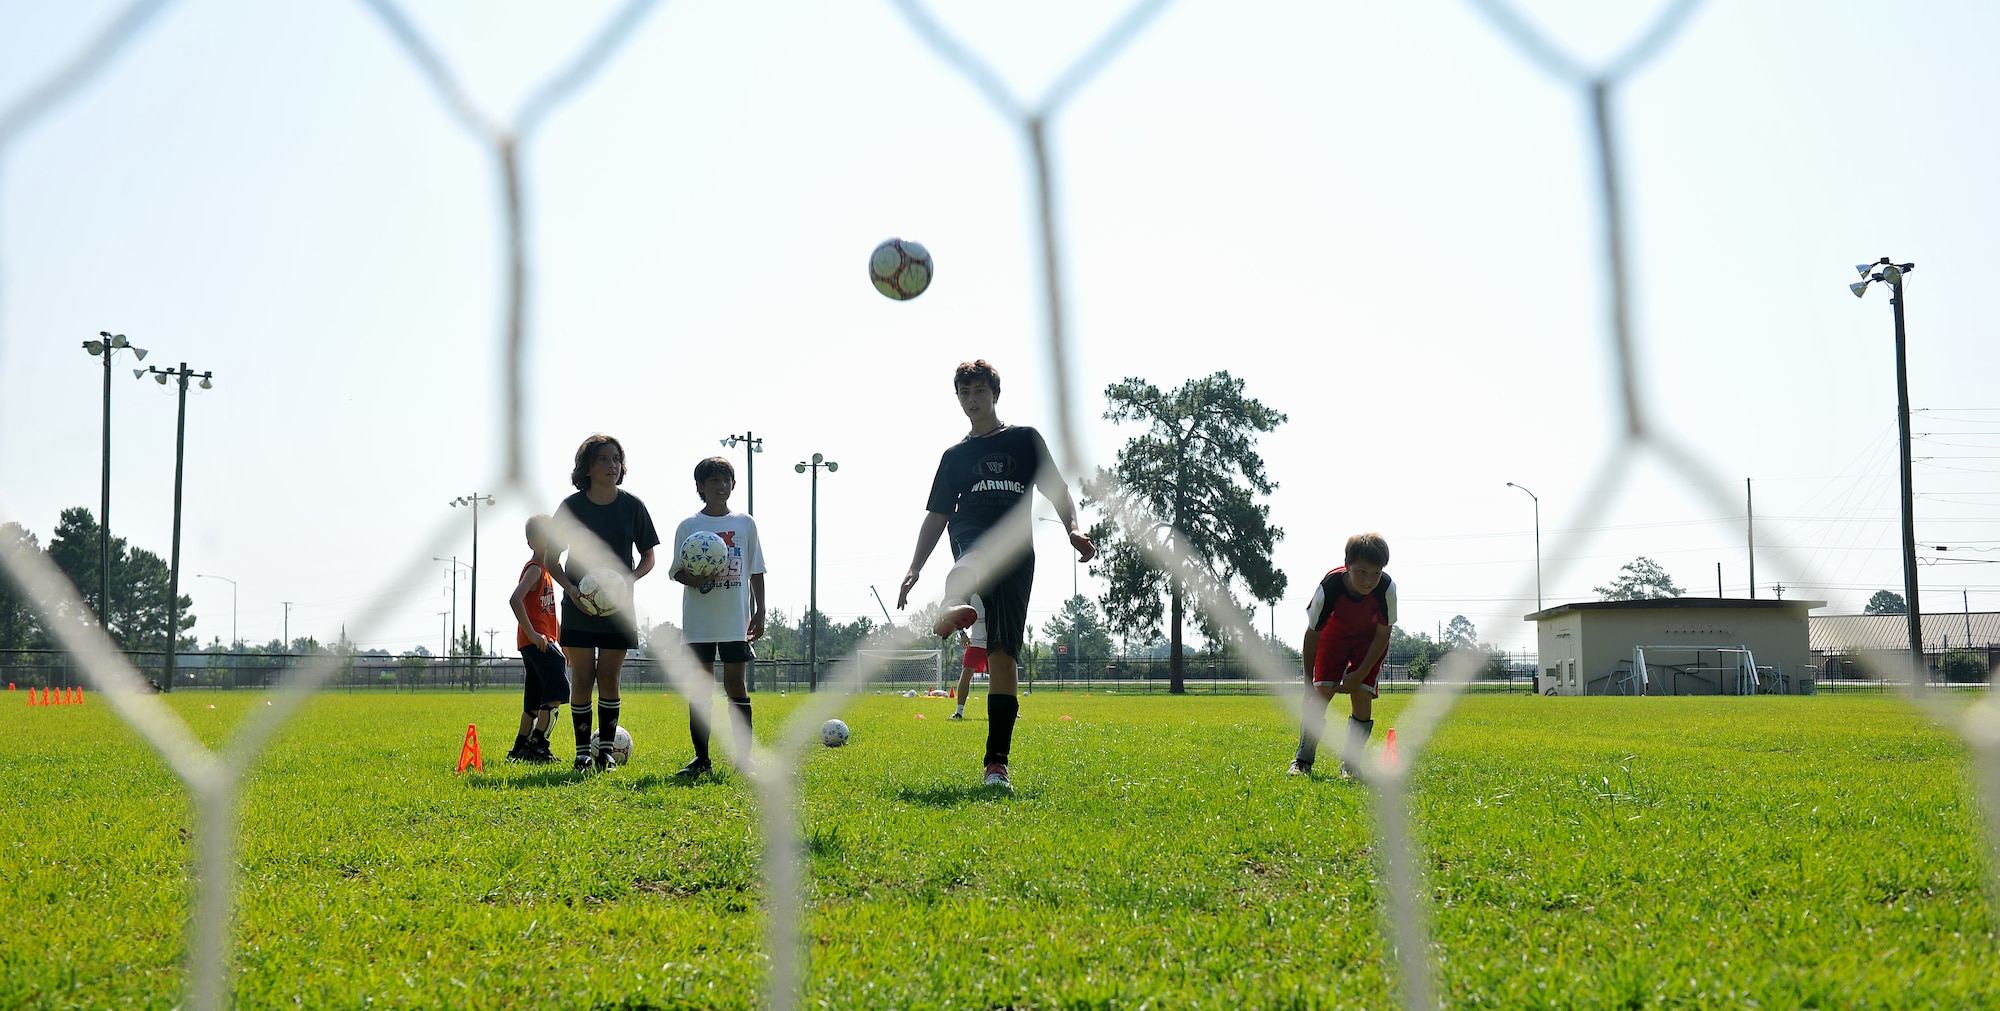 MOODY AIR FORCE BASE, Ga. -- Children perform drills that challenge them to kick the ball on top of the net during a Major League Soccer camp here June 11. Most of the drills were done consecutively and became more challenging as the day went on. (U.S. Air Force photo by Airman 1st Class Joshua Green/RELEASED)